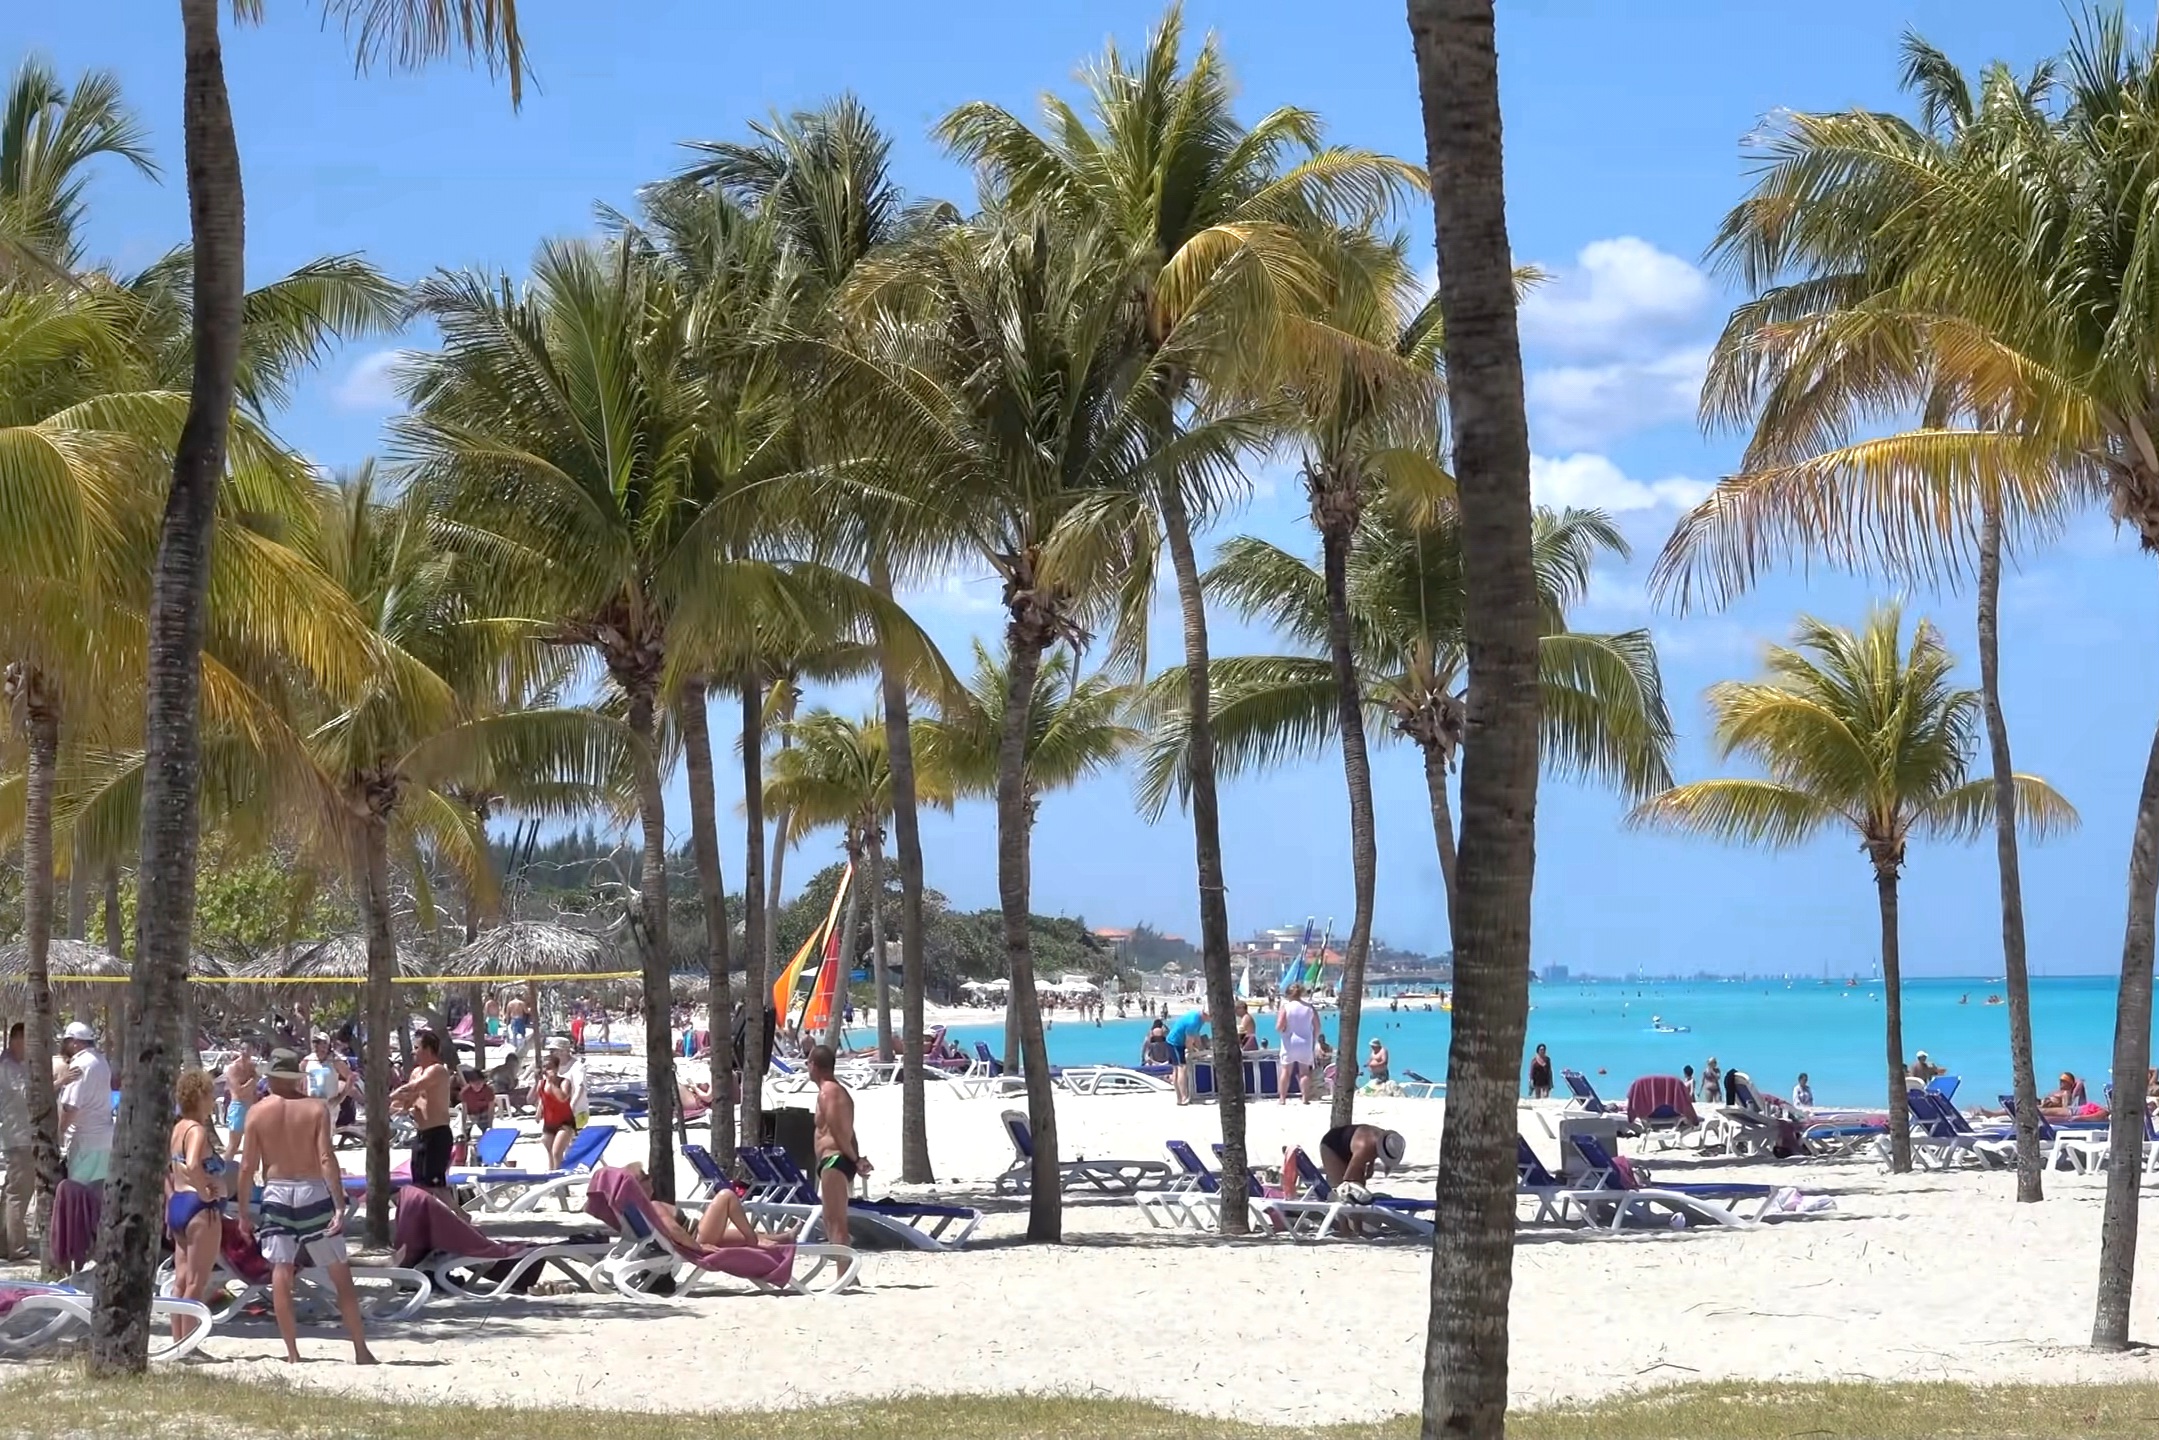 According to TripAdvisor, Varadero is now the tenth best beach in the world